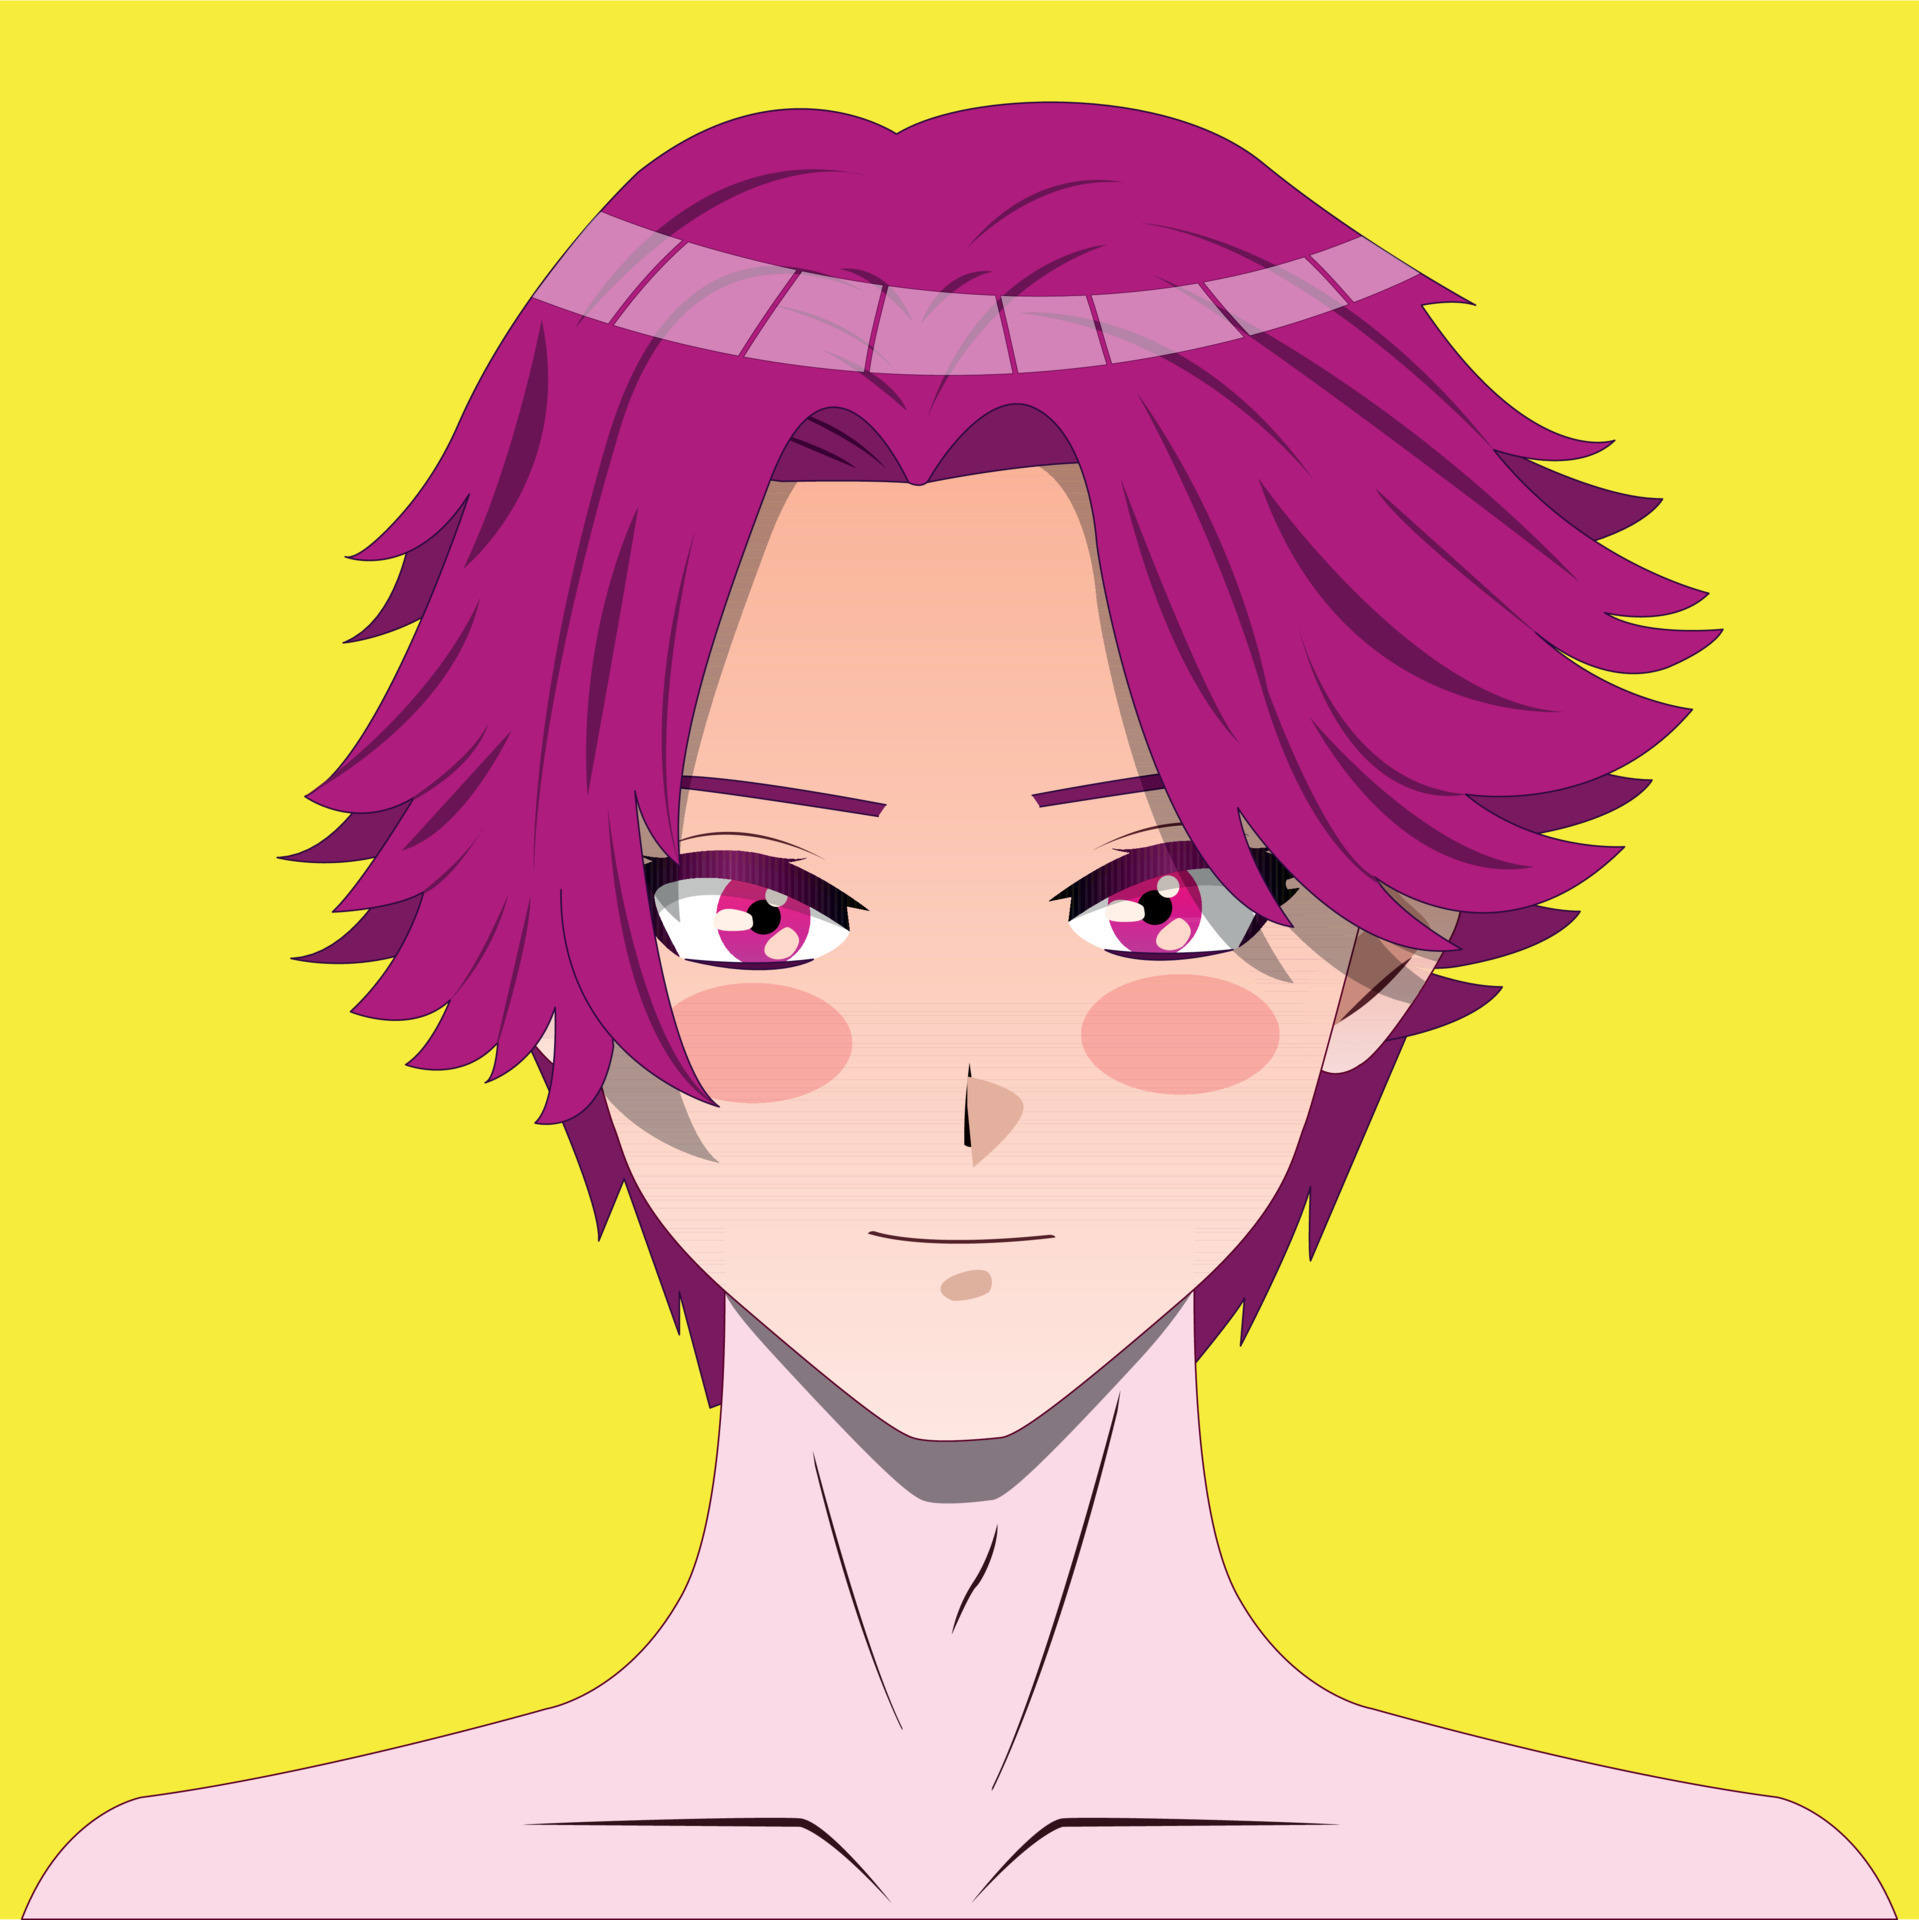 Clip Download Boys Drawing Smile  Anime Boy Smiling Drawing PNG Image   Transparent PNG Free Download on SeekPNG